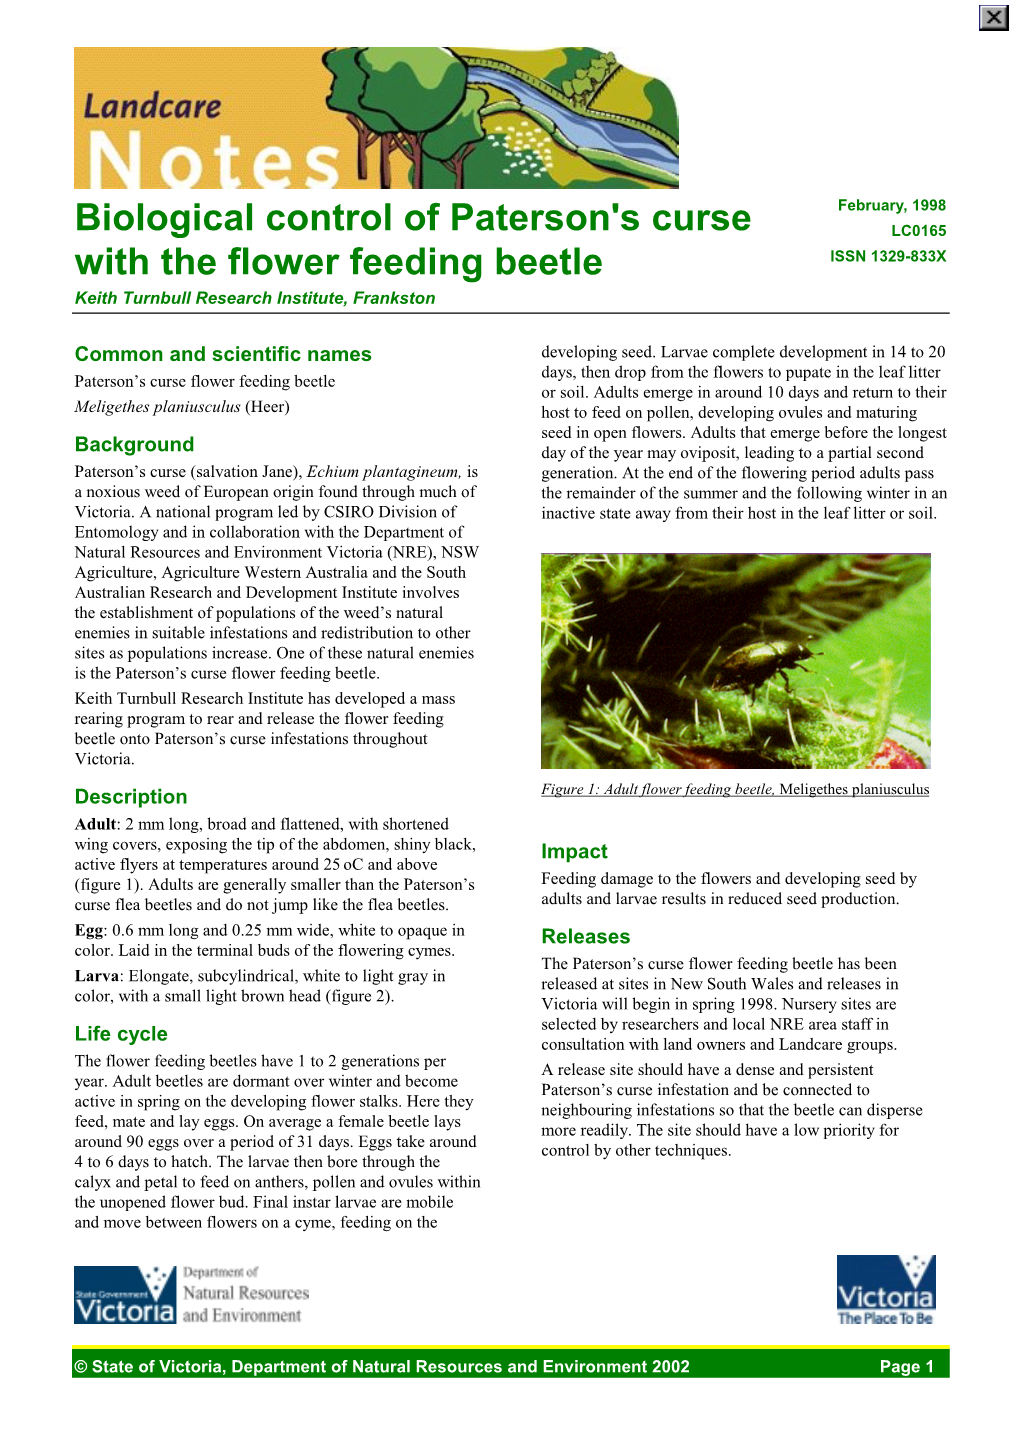 Biological Control of Paterson's Curse with the Flower Feeding Beetle (DSE